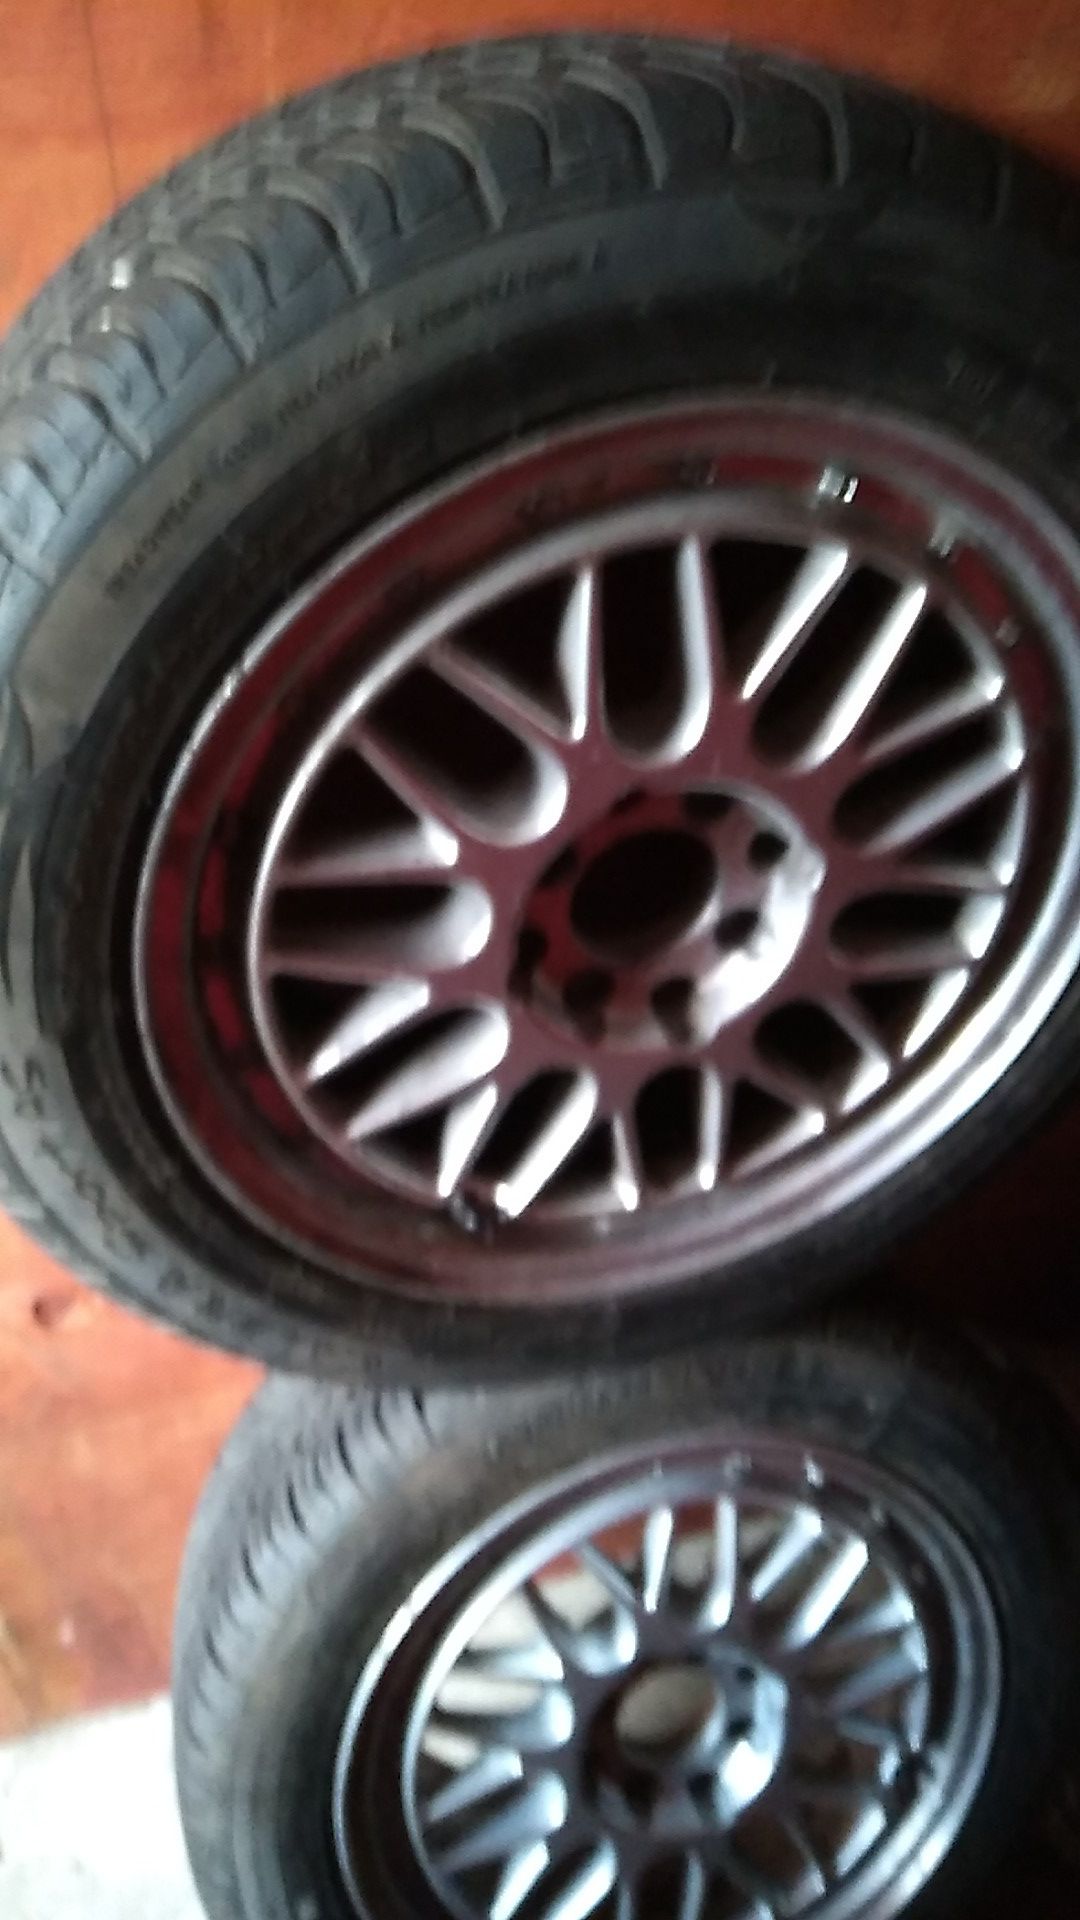 15 inch jdm rims lightweight racing new all season tires universal fit little scratches no cracks good togo